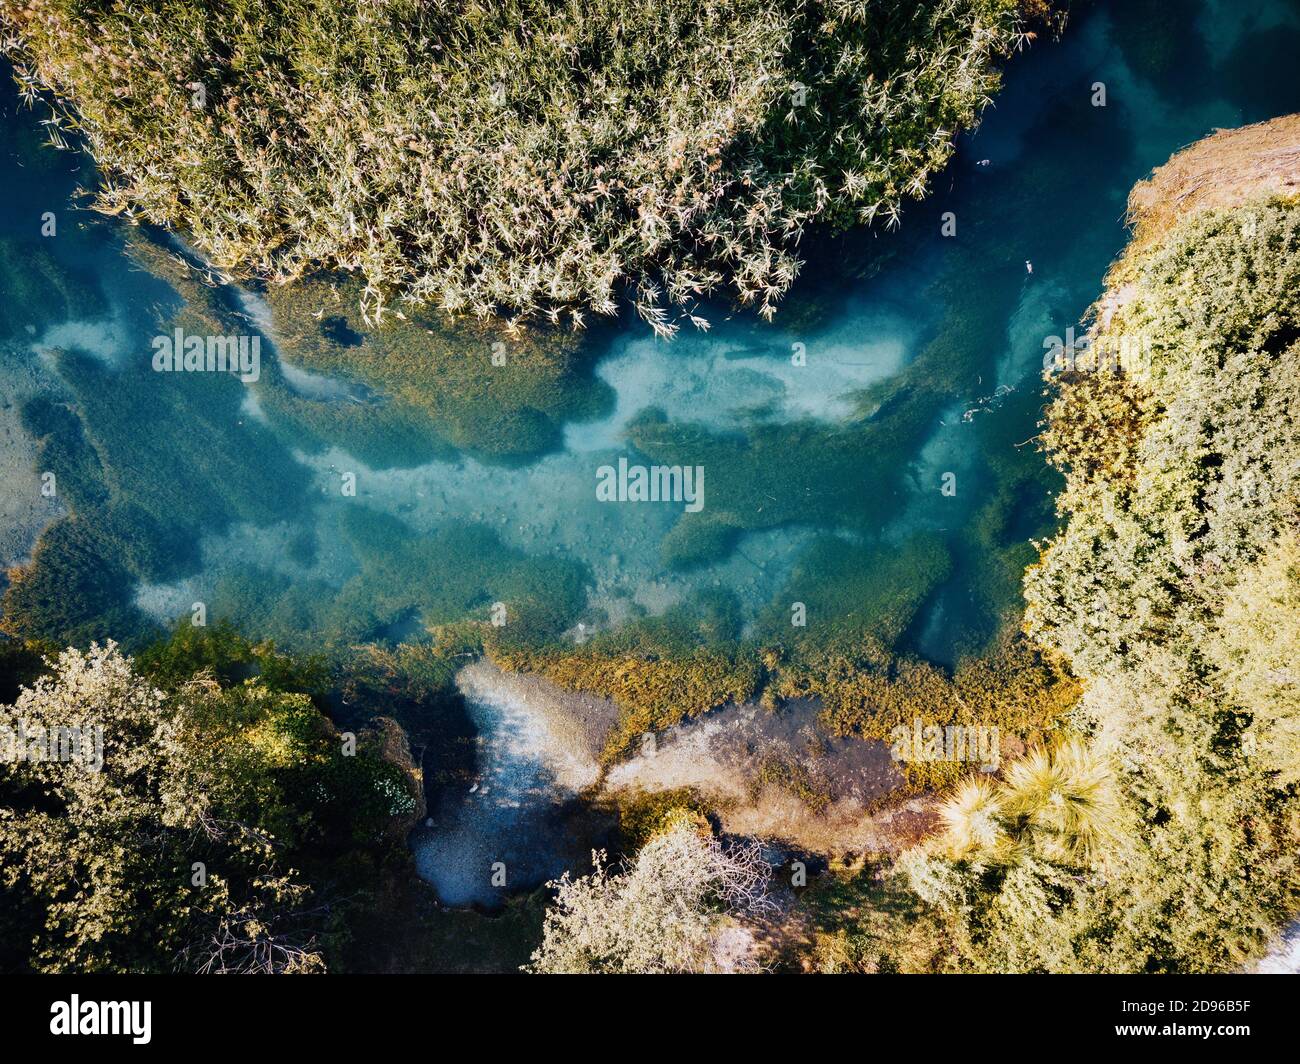 Tirino, river in Abruzzo, Southern Italy. Aerial view Stock Photo